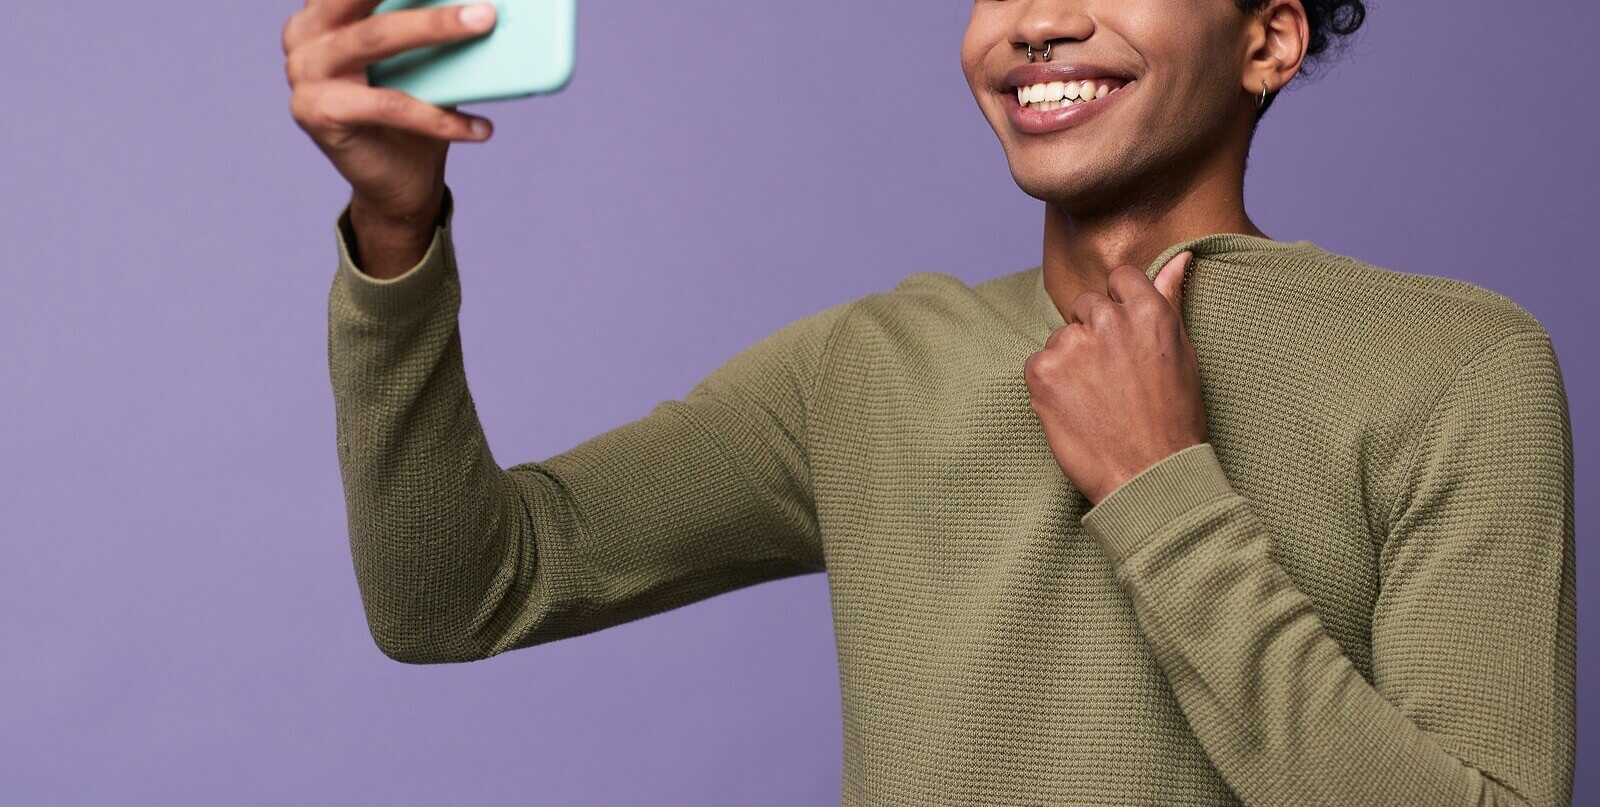 Image of a young teen holding up a cell phone and smiling at it. Is your teen's mental health being affected by social media? Learn to support their mental health with teen counseling in Macon, GA.